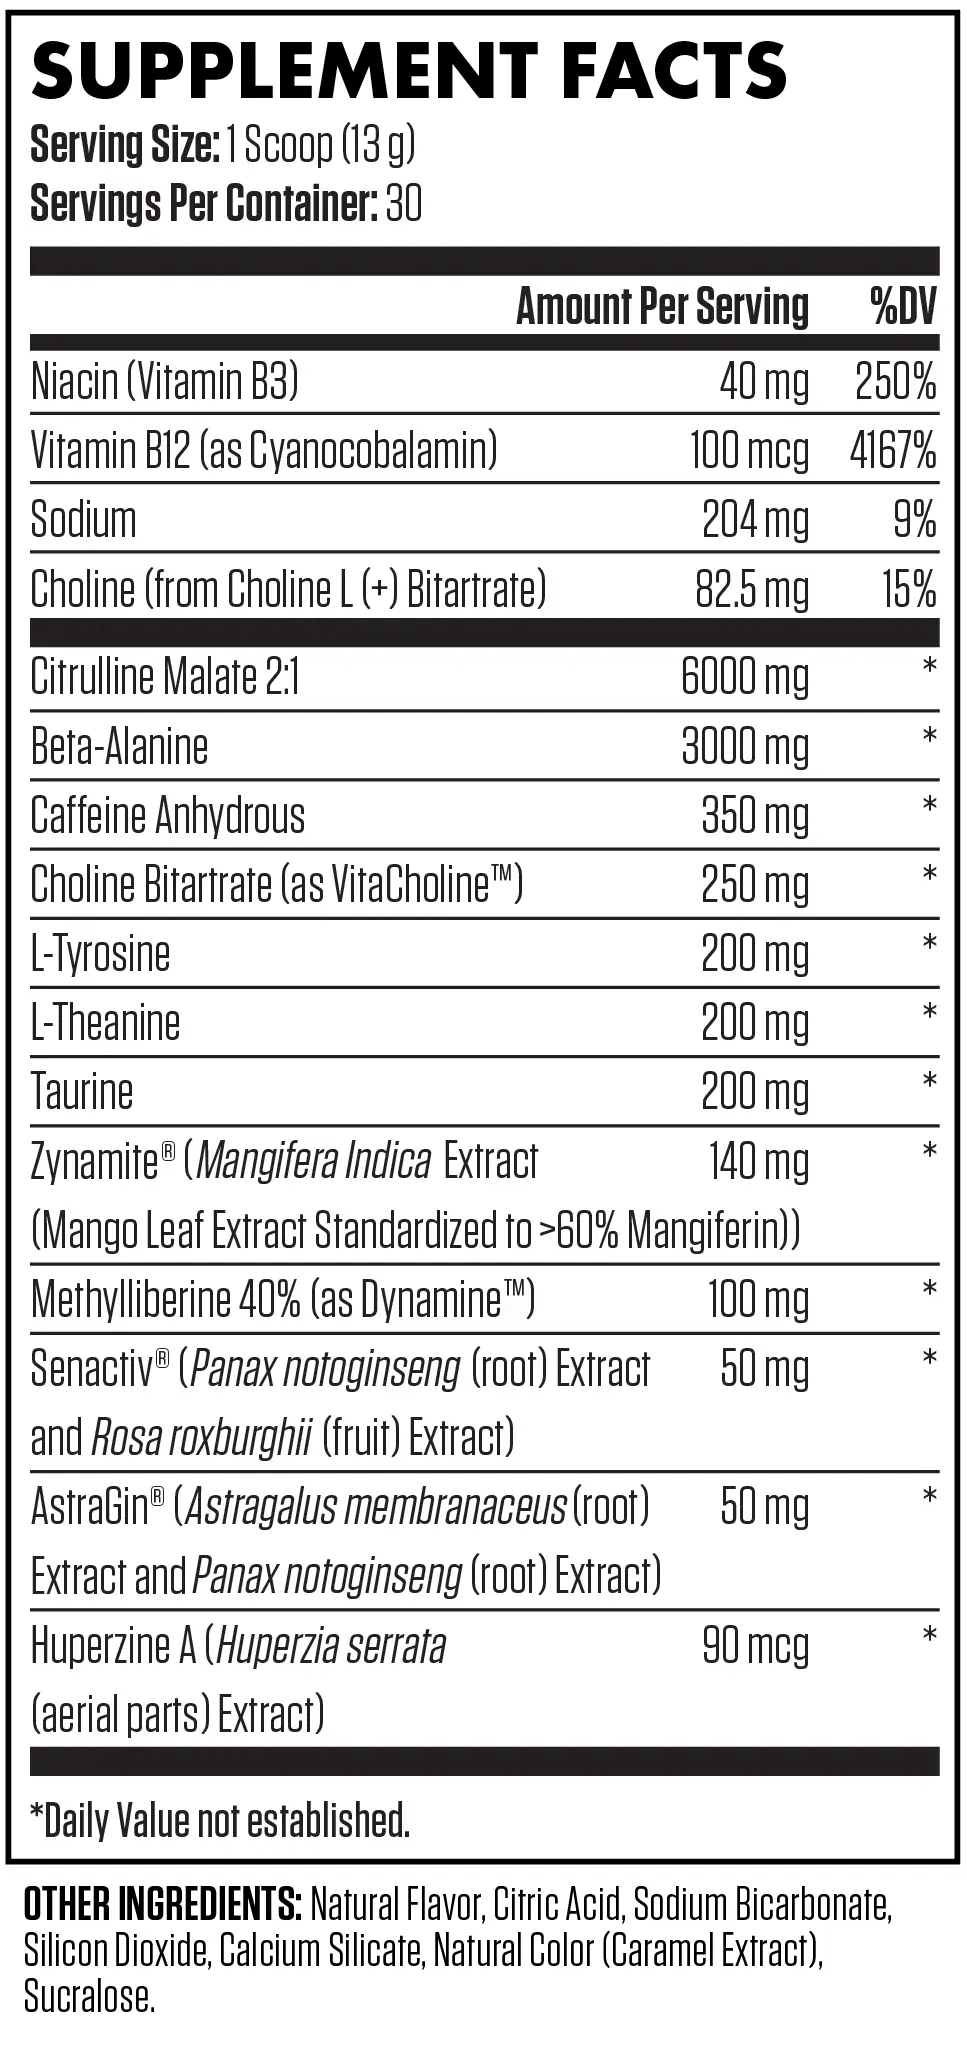 Supplement facts label for a product with ingredients including niacin, vitamin B12, sodium, choline, caffeine, various natural extracts, and other ingredients.